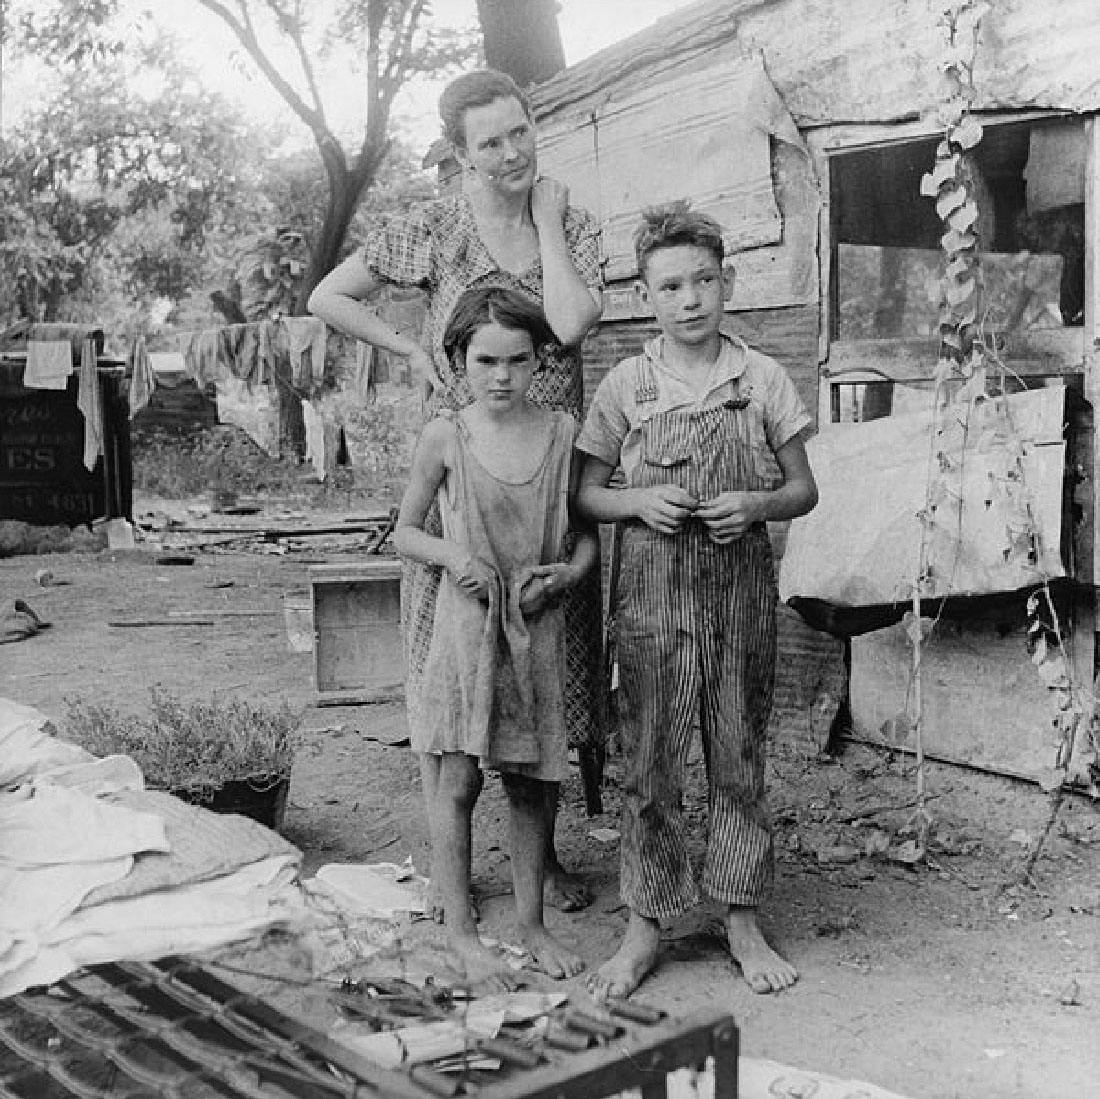 The photograph captures a woman and two children. They are barefoot and their clothes look dirty. Trash is visible nearby.